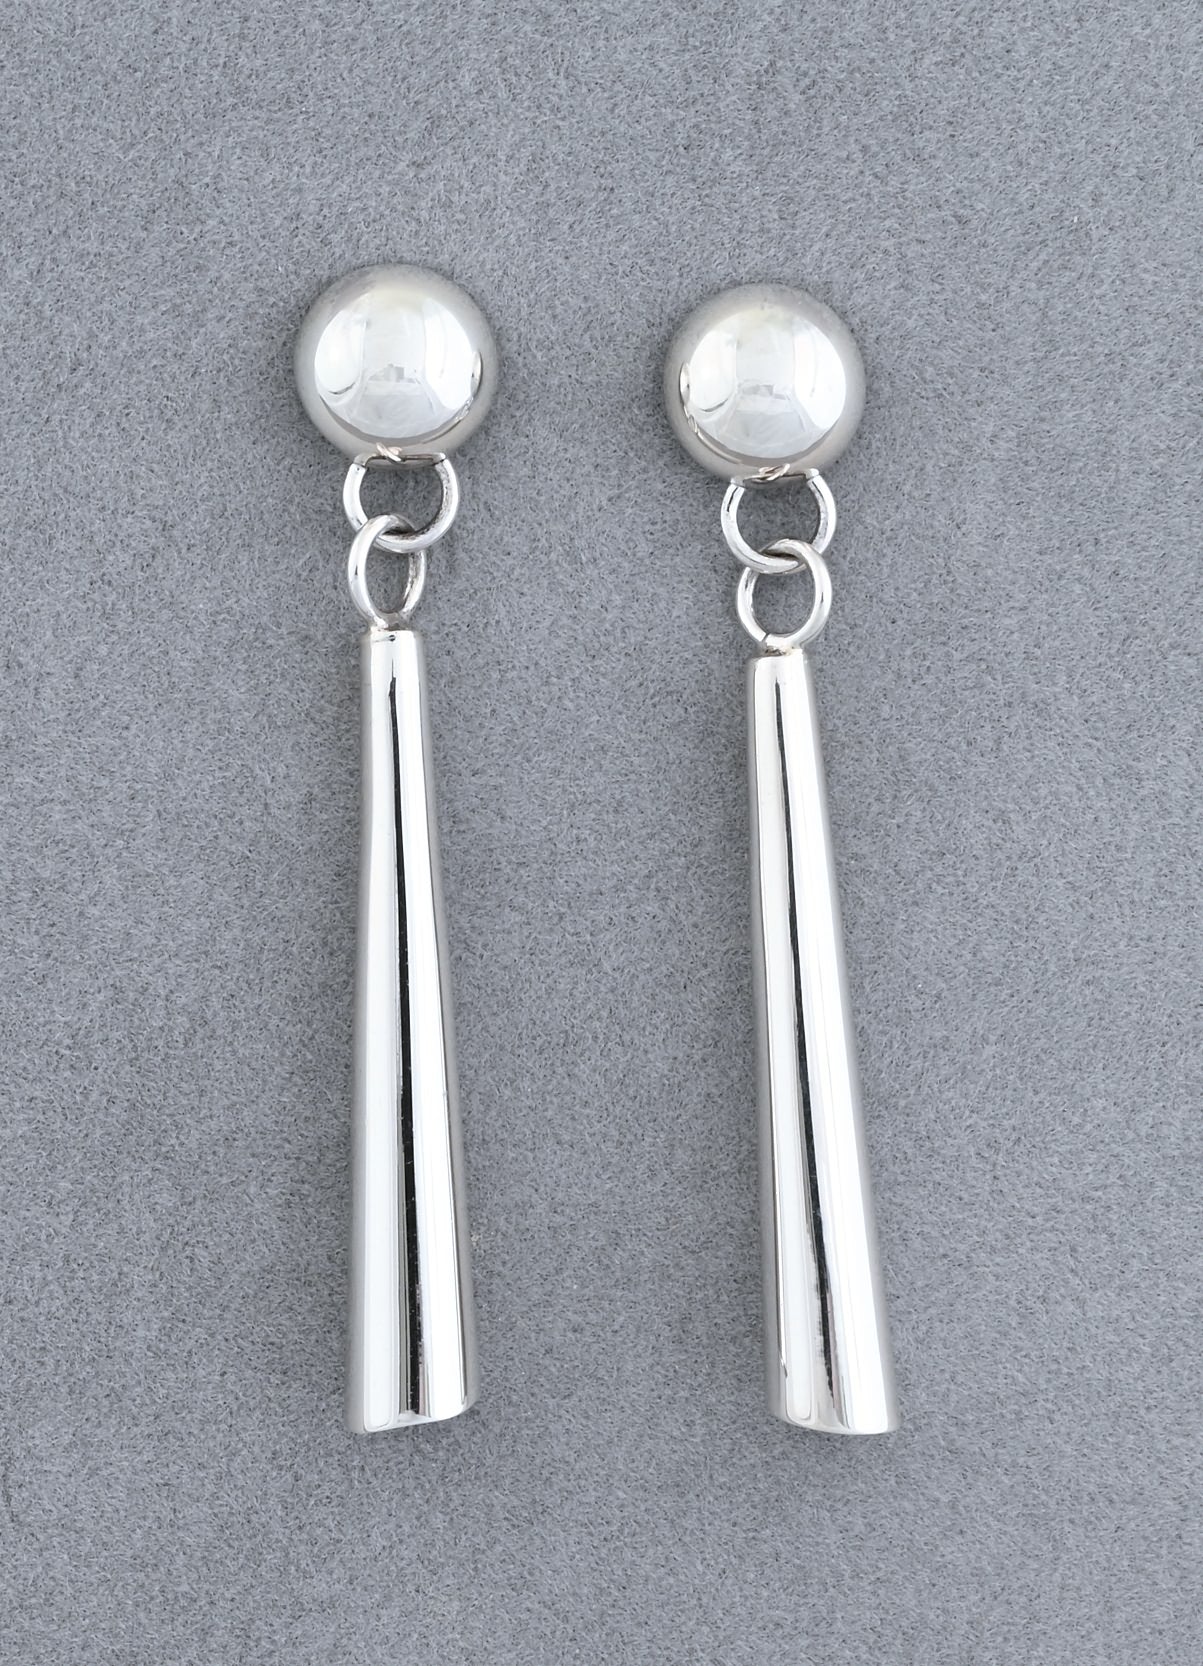 Earrings with Cylindrical Drop by Artie Yellowhorse